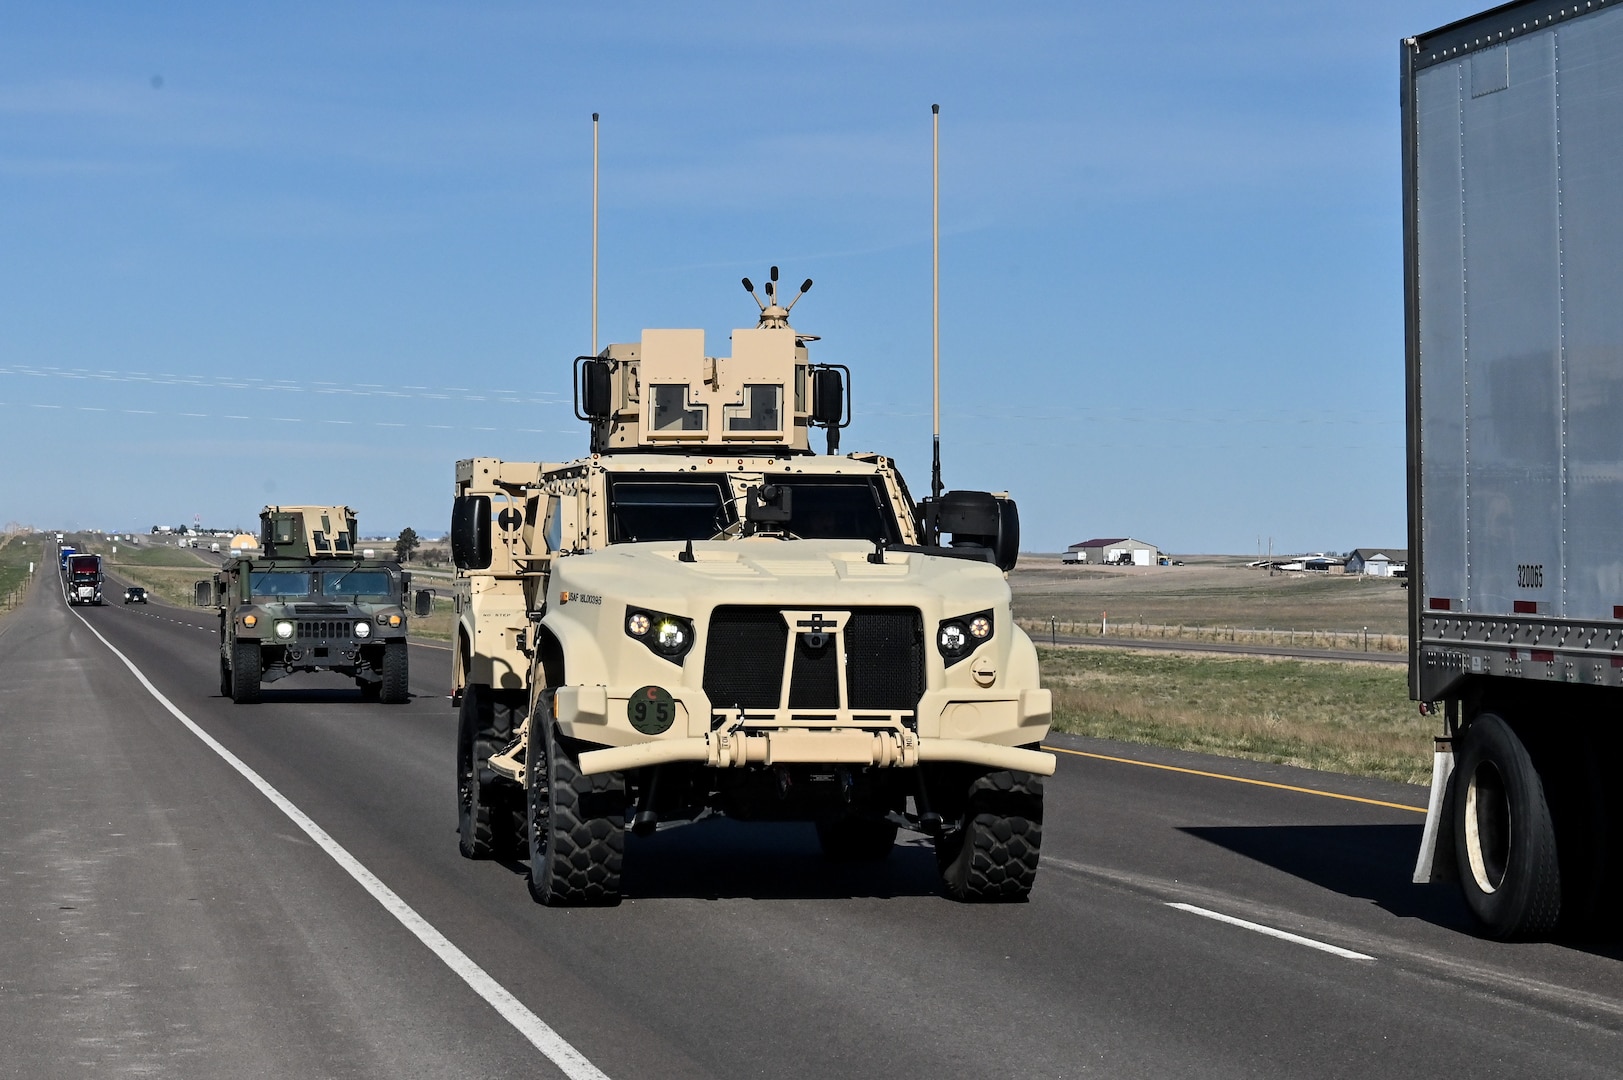 Airmen from the 90th Missile Security Forces Squadron conduct the first operational Joint Light Tactical Vehicle mission supporting maintenance at a launch facility near Harrisburg, Nebraska, April 24, 2023. This is the first step in modernizing the security forces vehicle fleet to provide more lethality and security for the nuclear enterprise. (Air Force photo by Joseph Coslett Jr.)